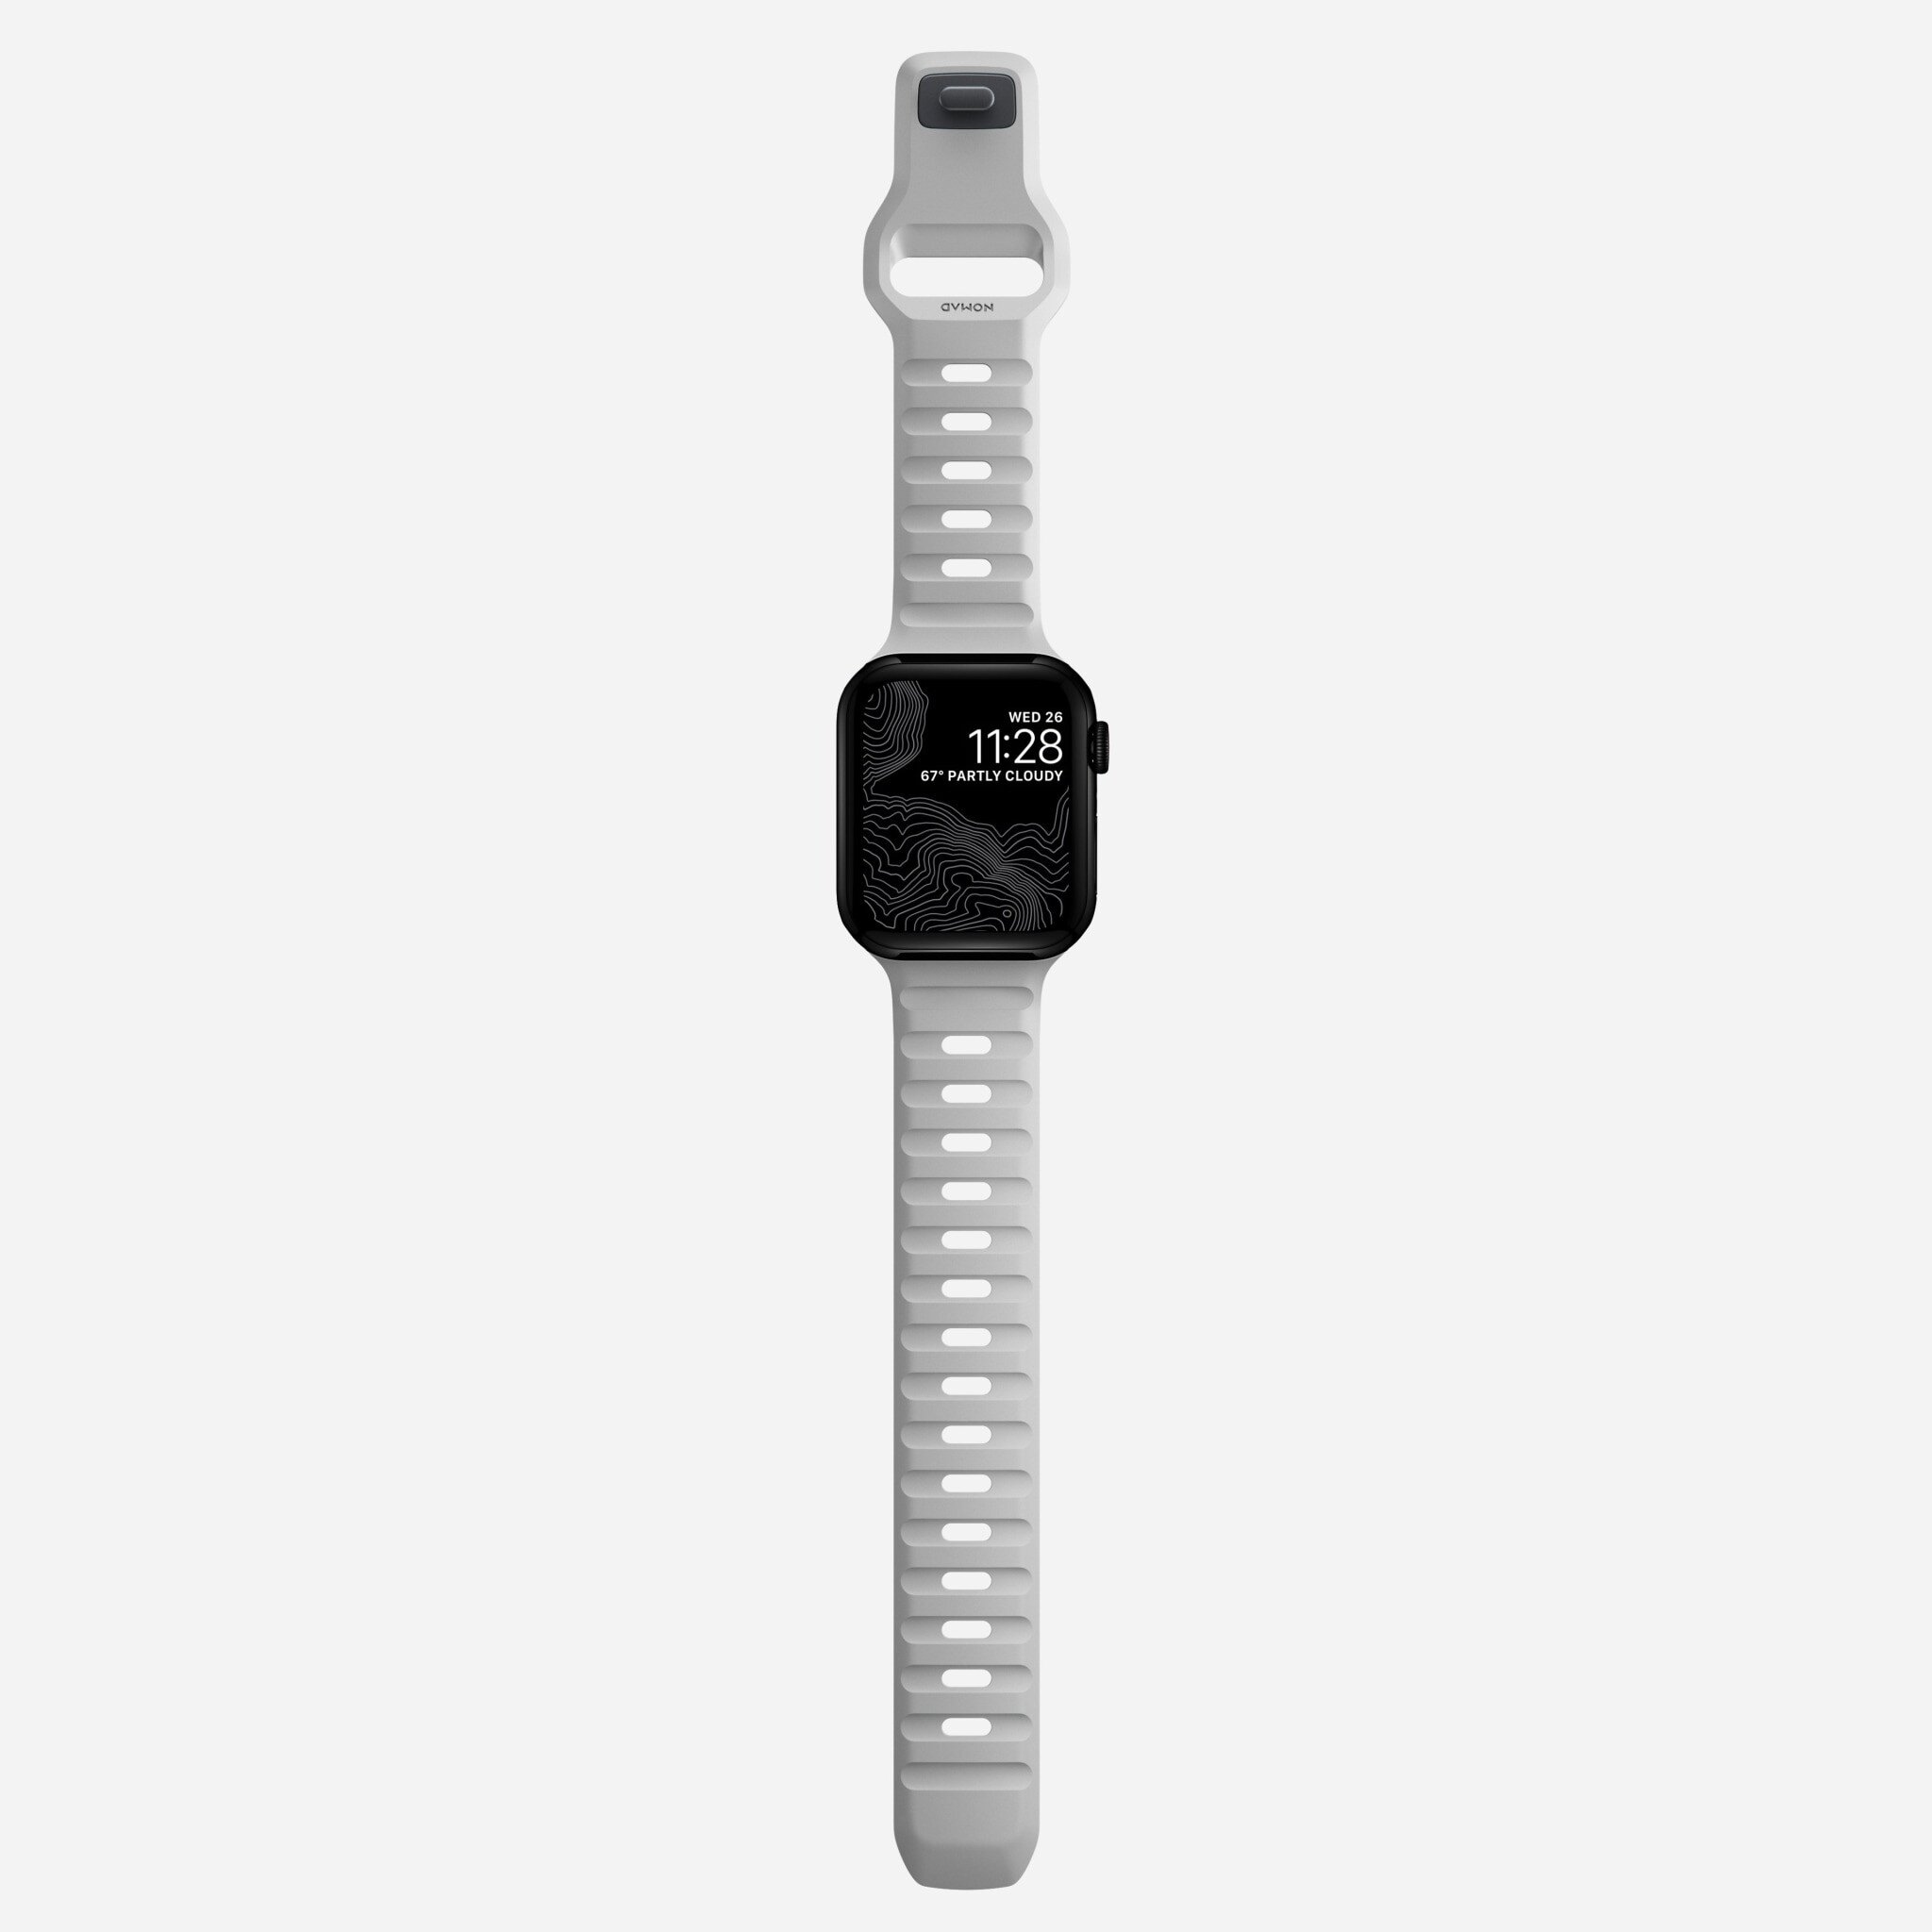 Nomad Sport Band Waterproof for Apple Watch - Lunar Gray - 40mm / 41mm